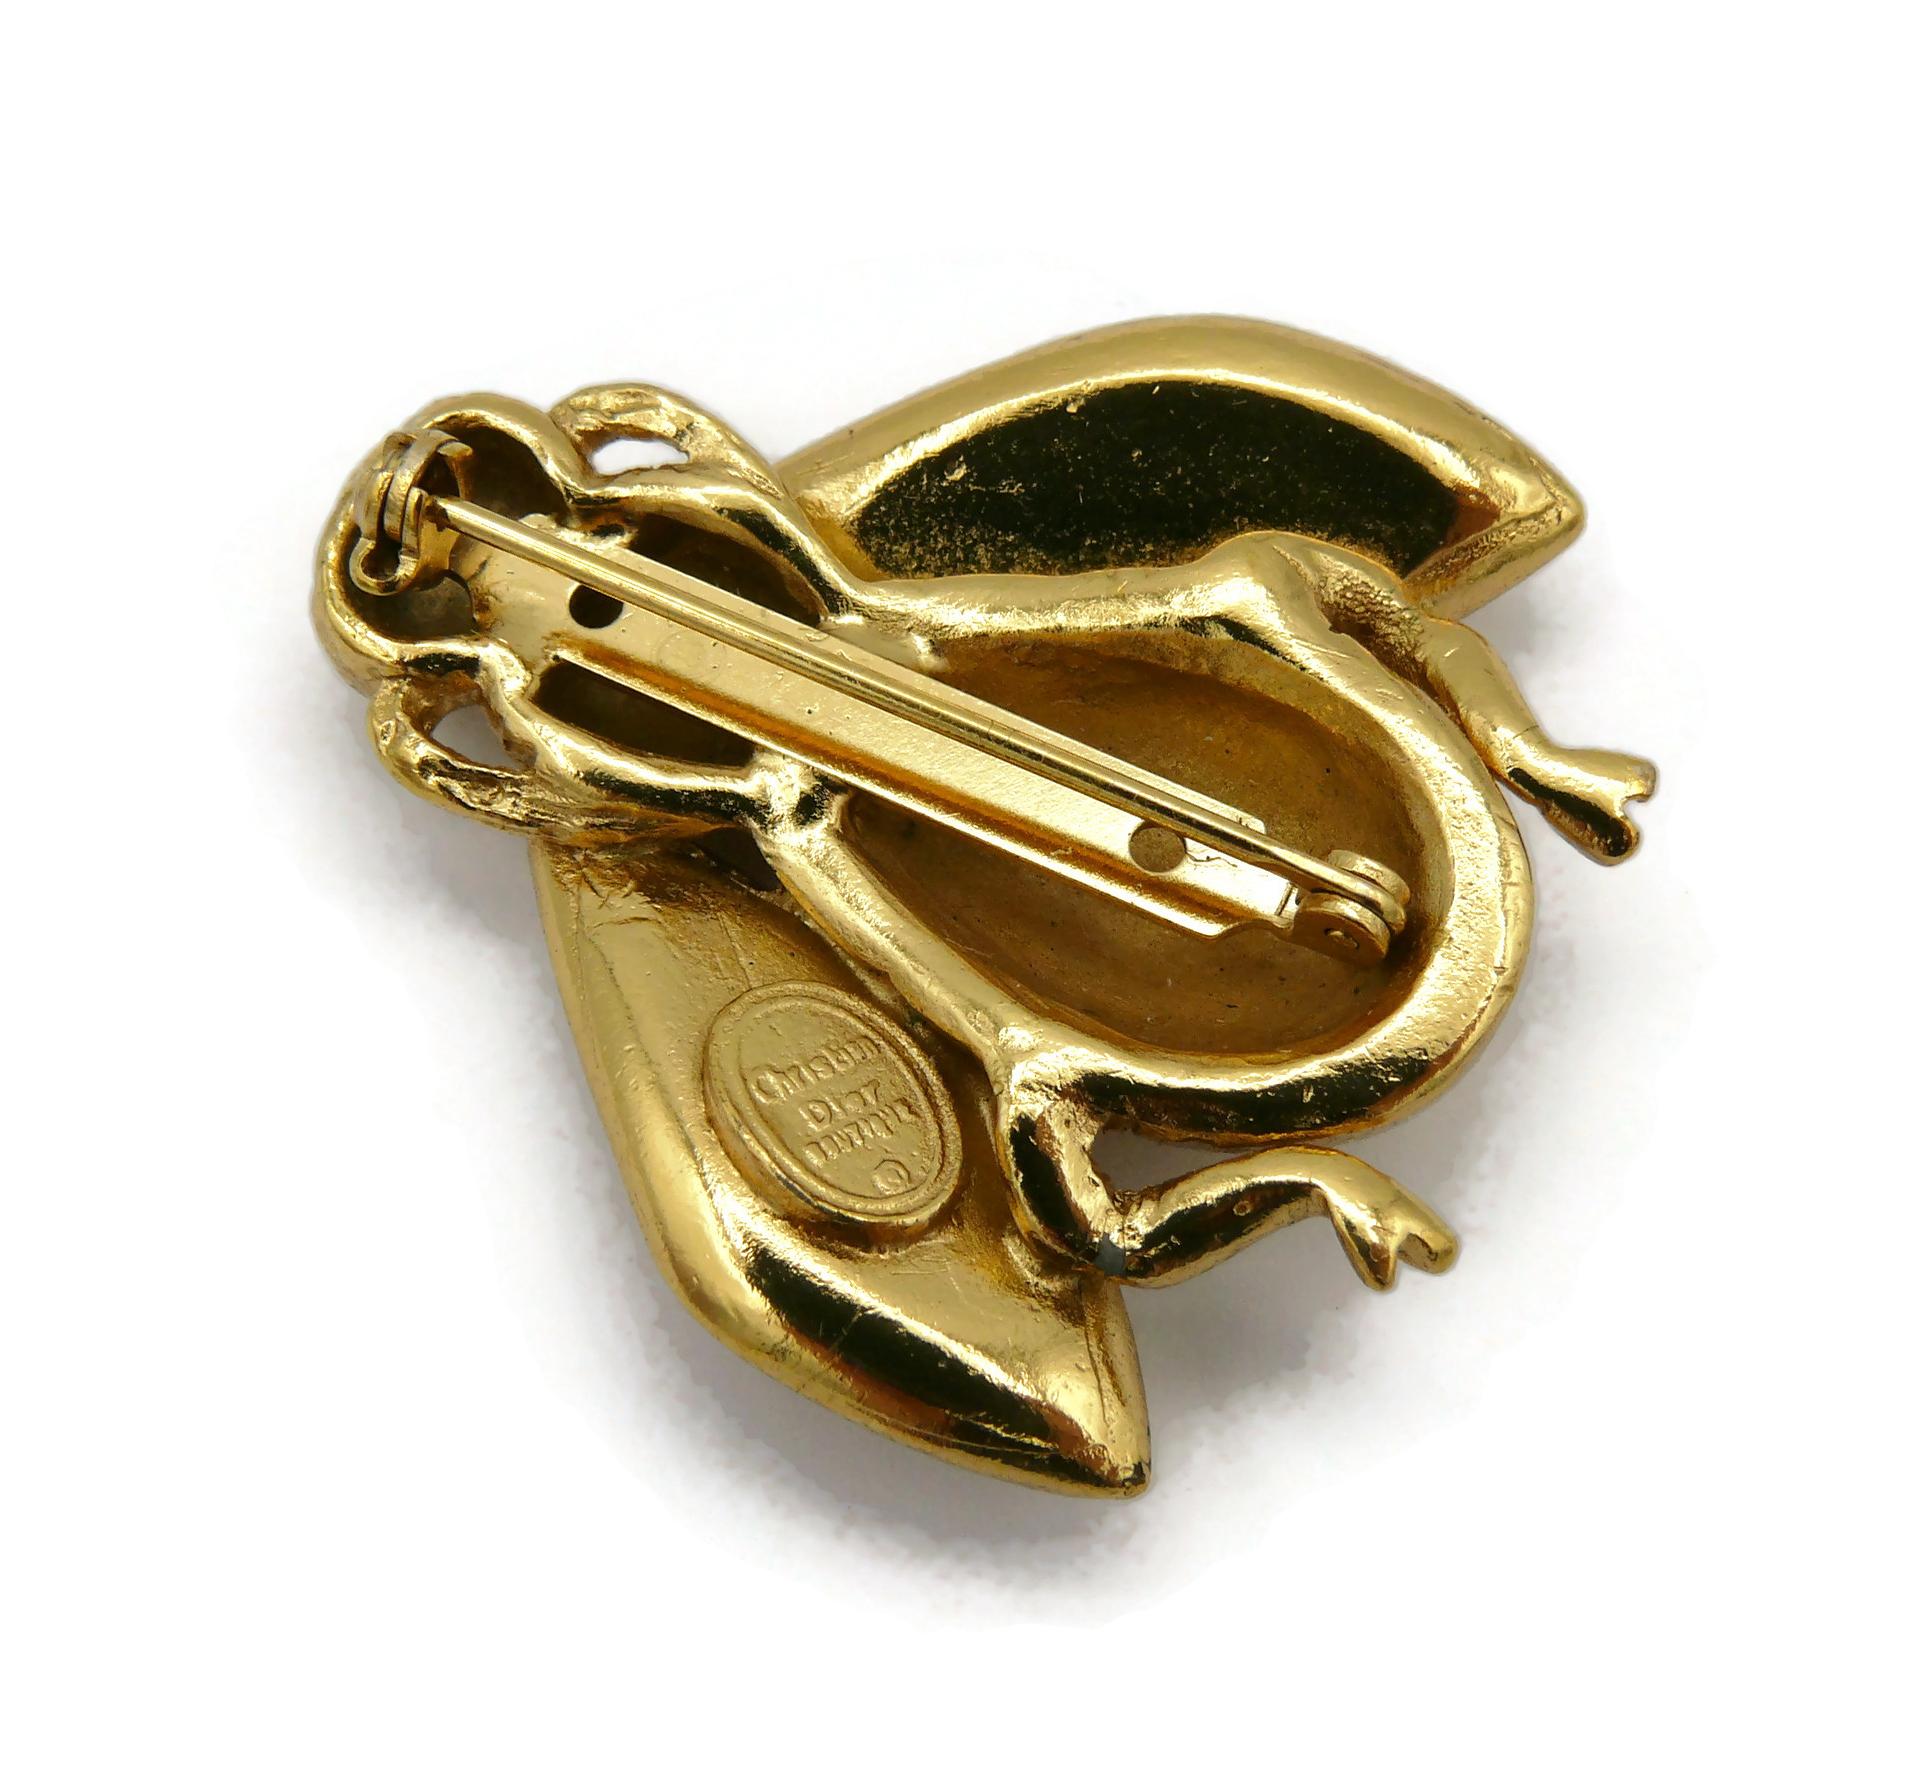 CHRISTIAN DIOR Boutique Vintage Iconic Gold Tone Bee Brooch 4